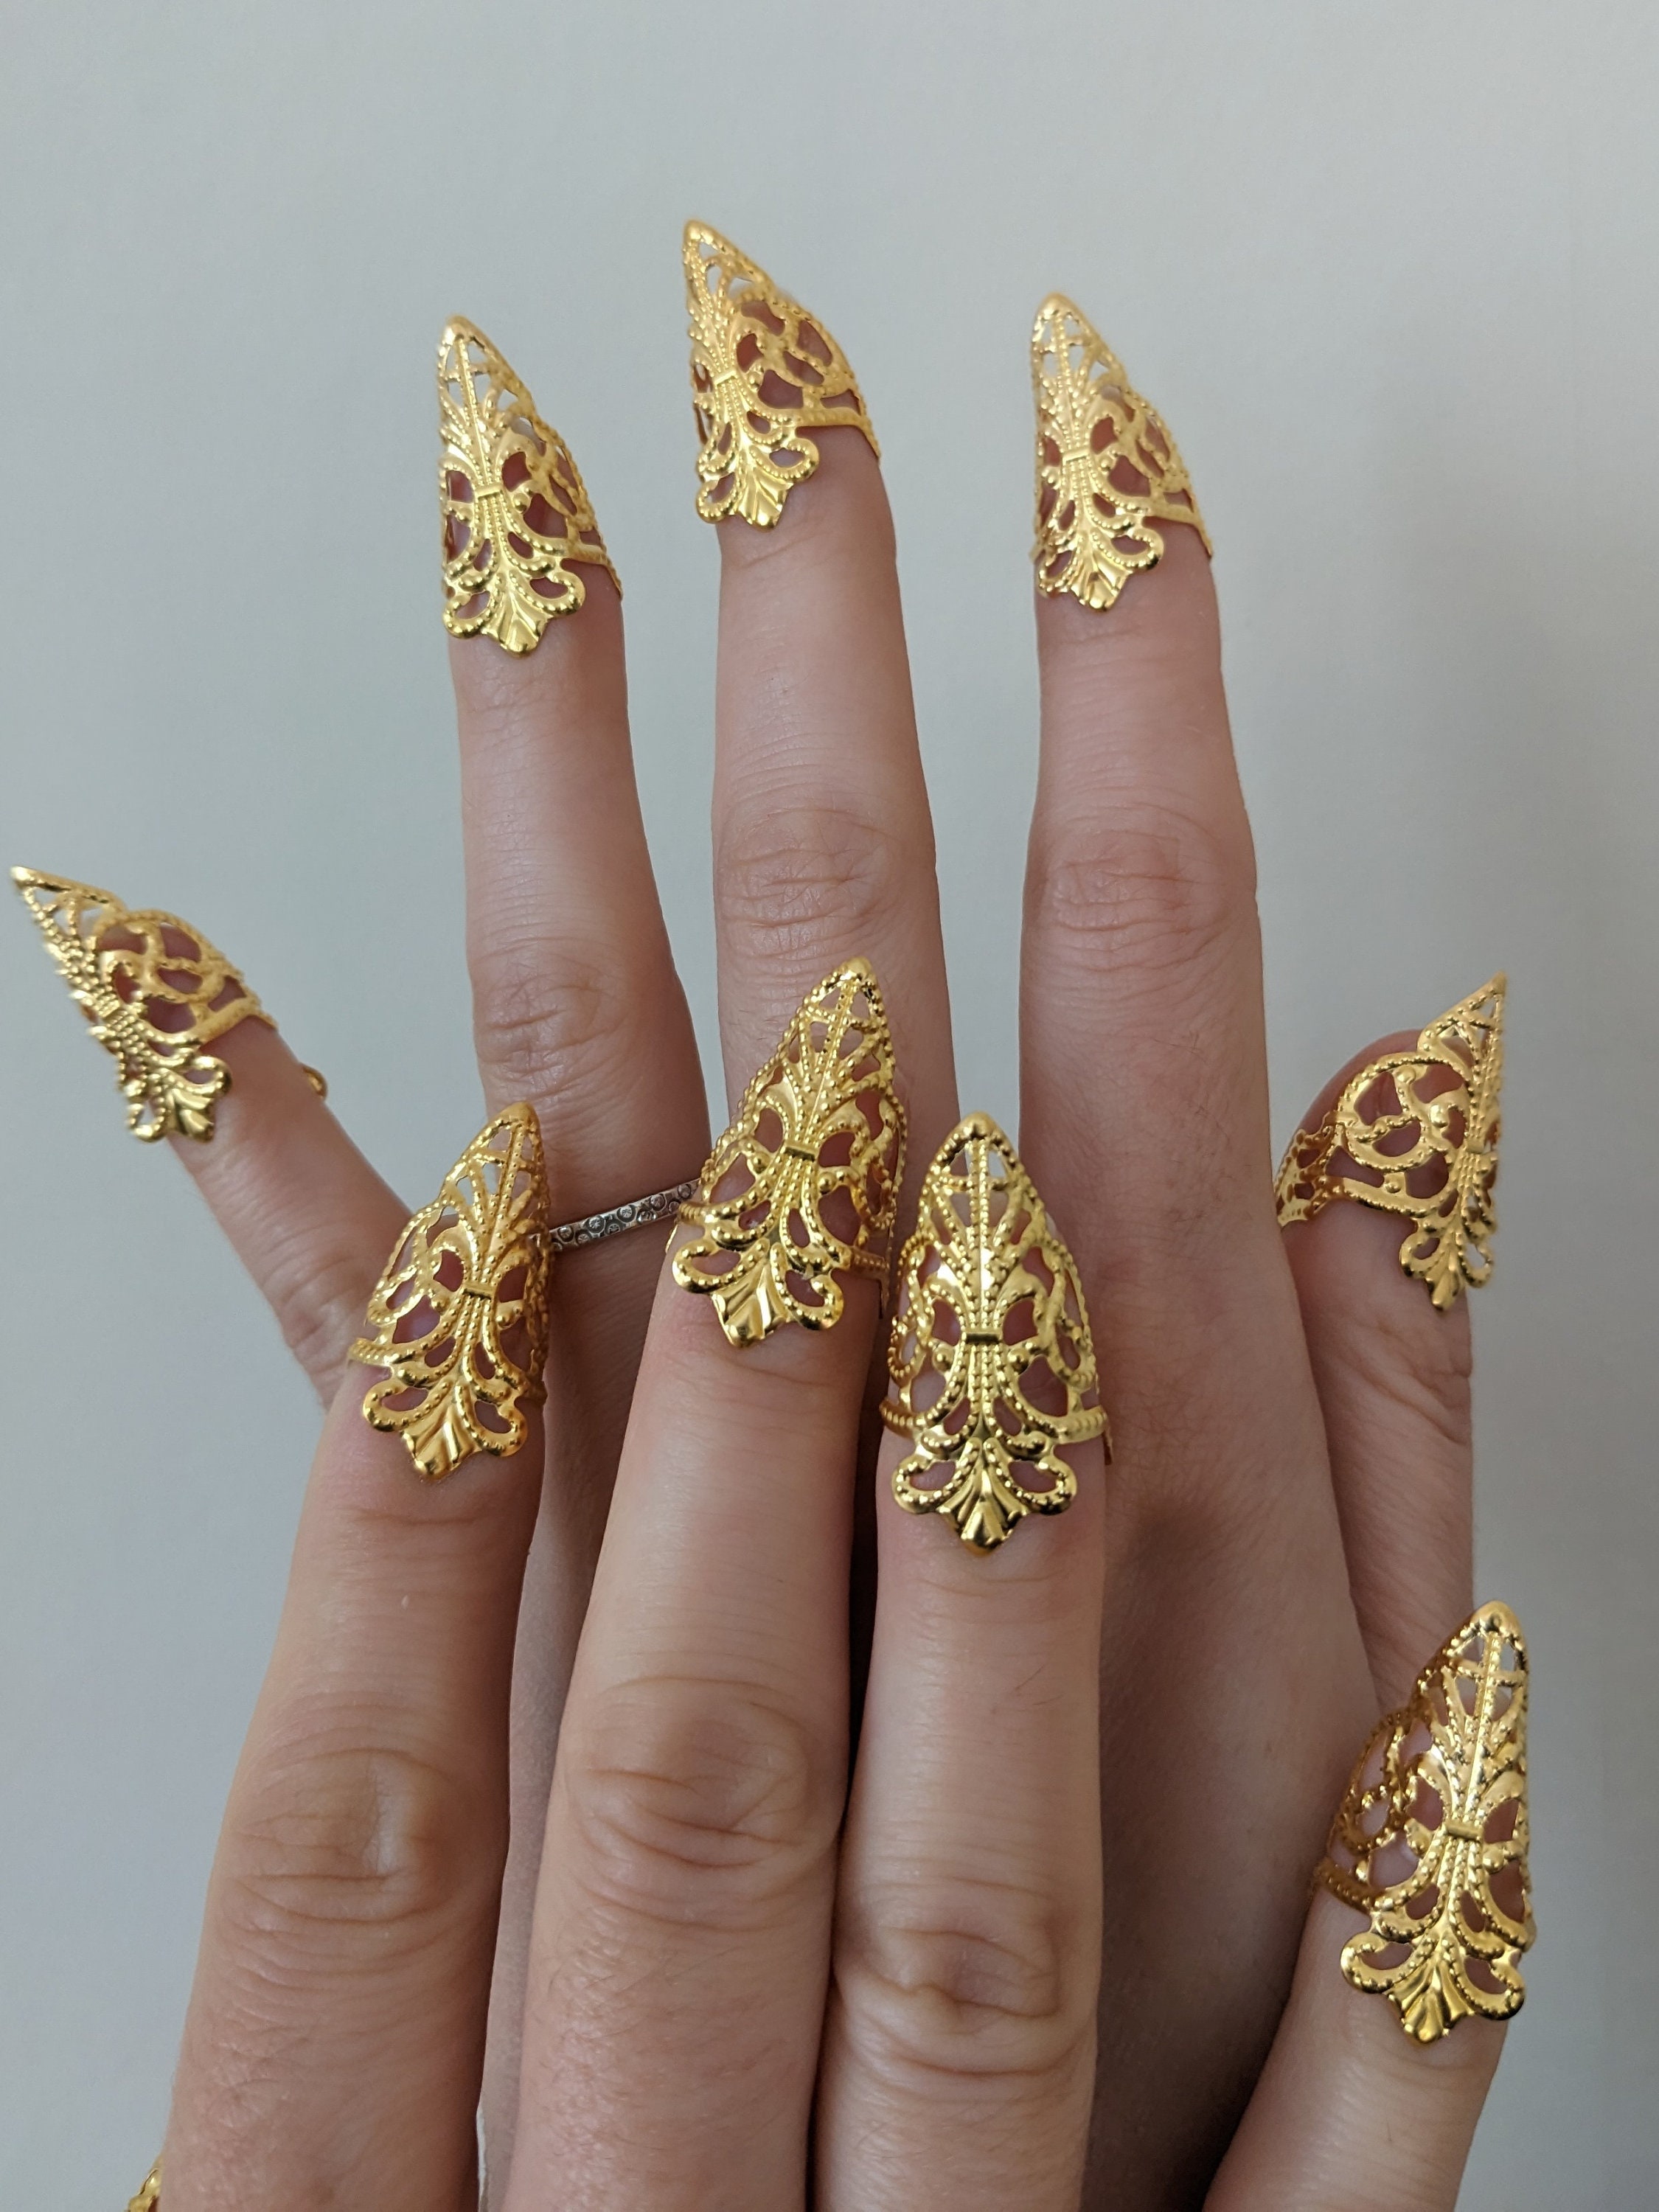 Finger Nail Tip Claw Rings Set 5pcs Thicken Retro Gold Claws Decoration  Accessory for Women Dance Party